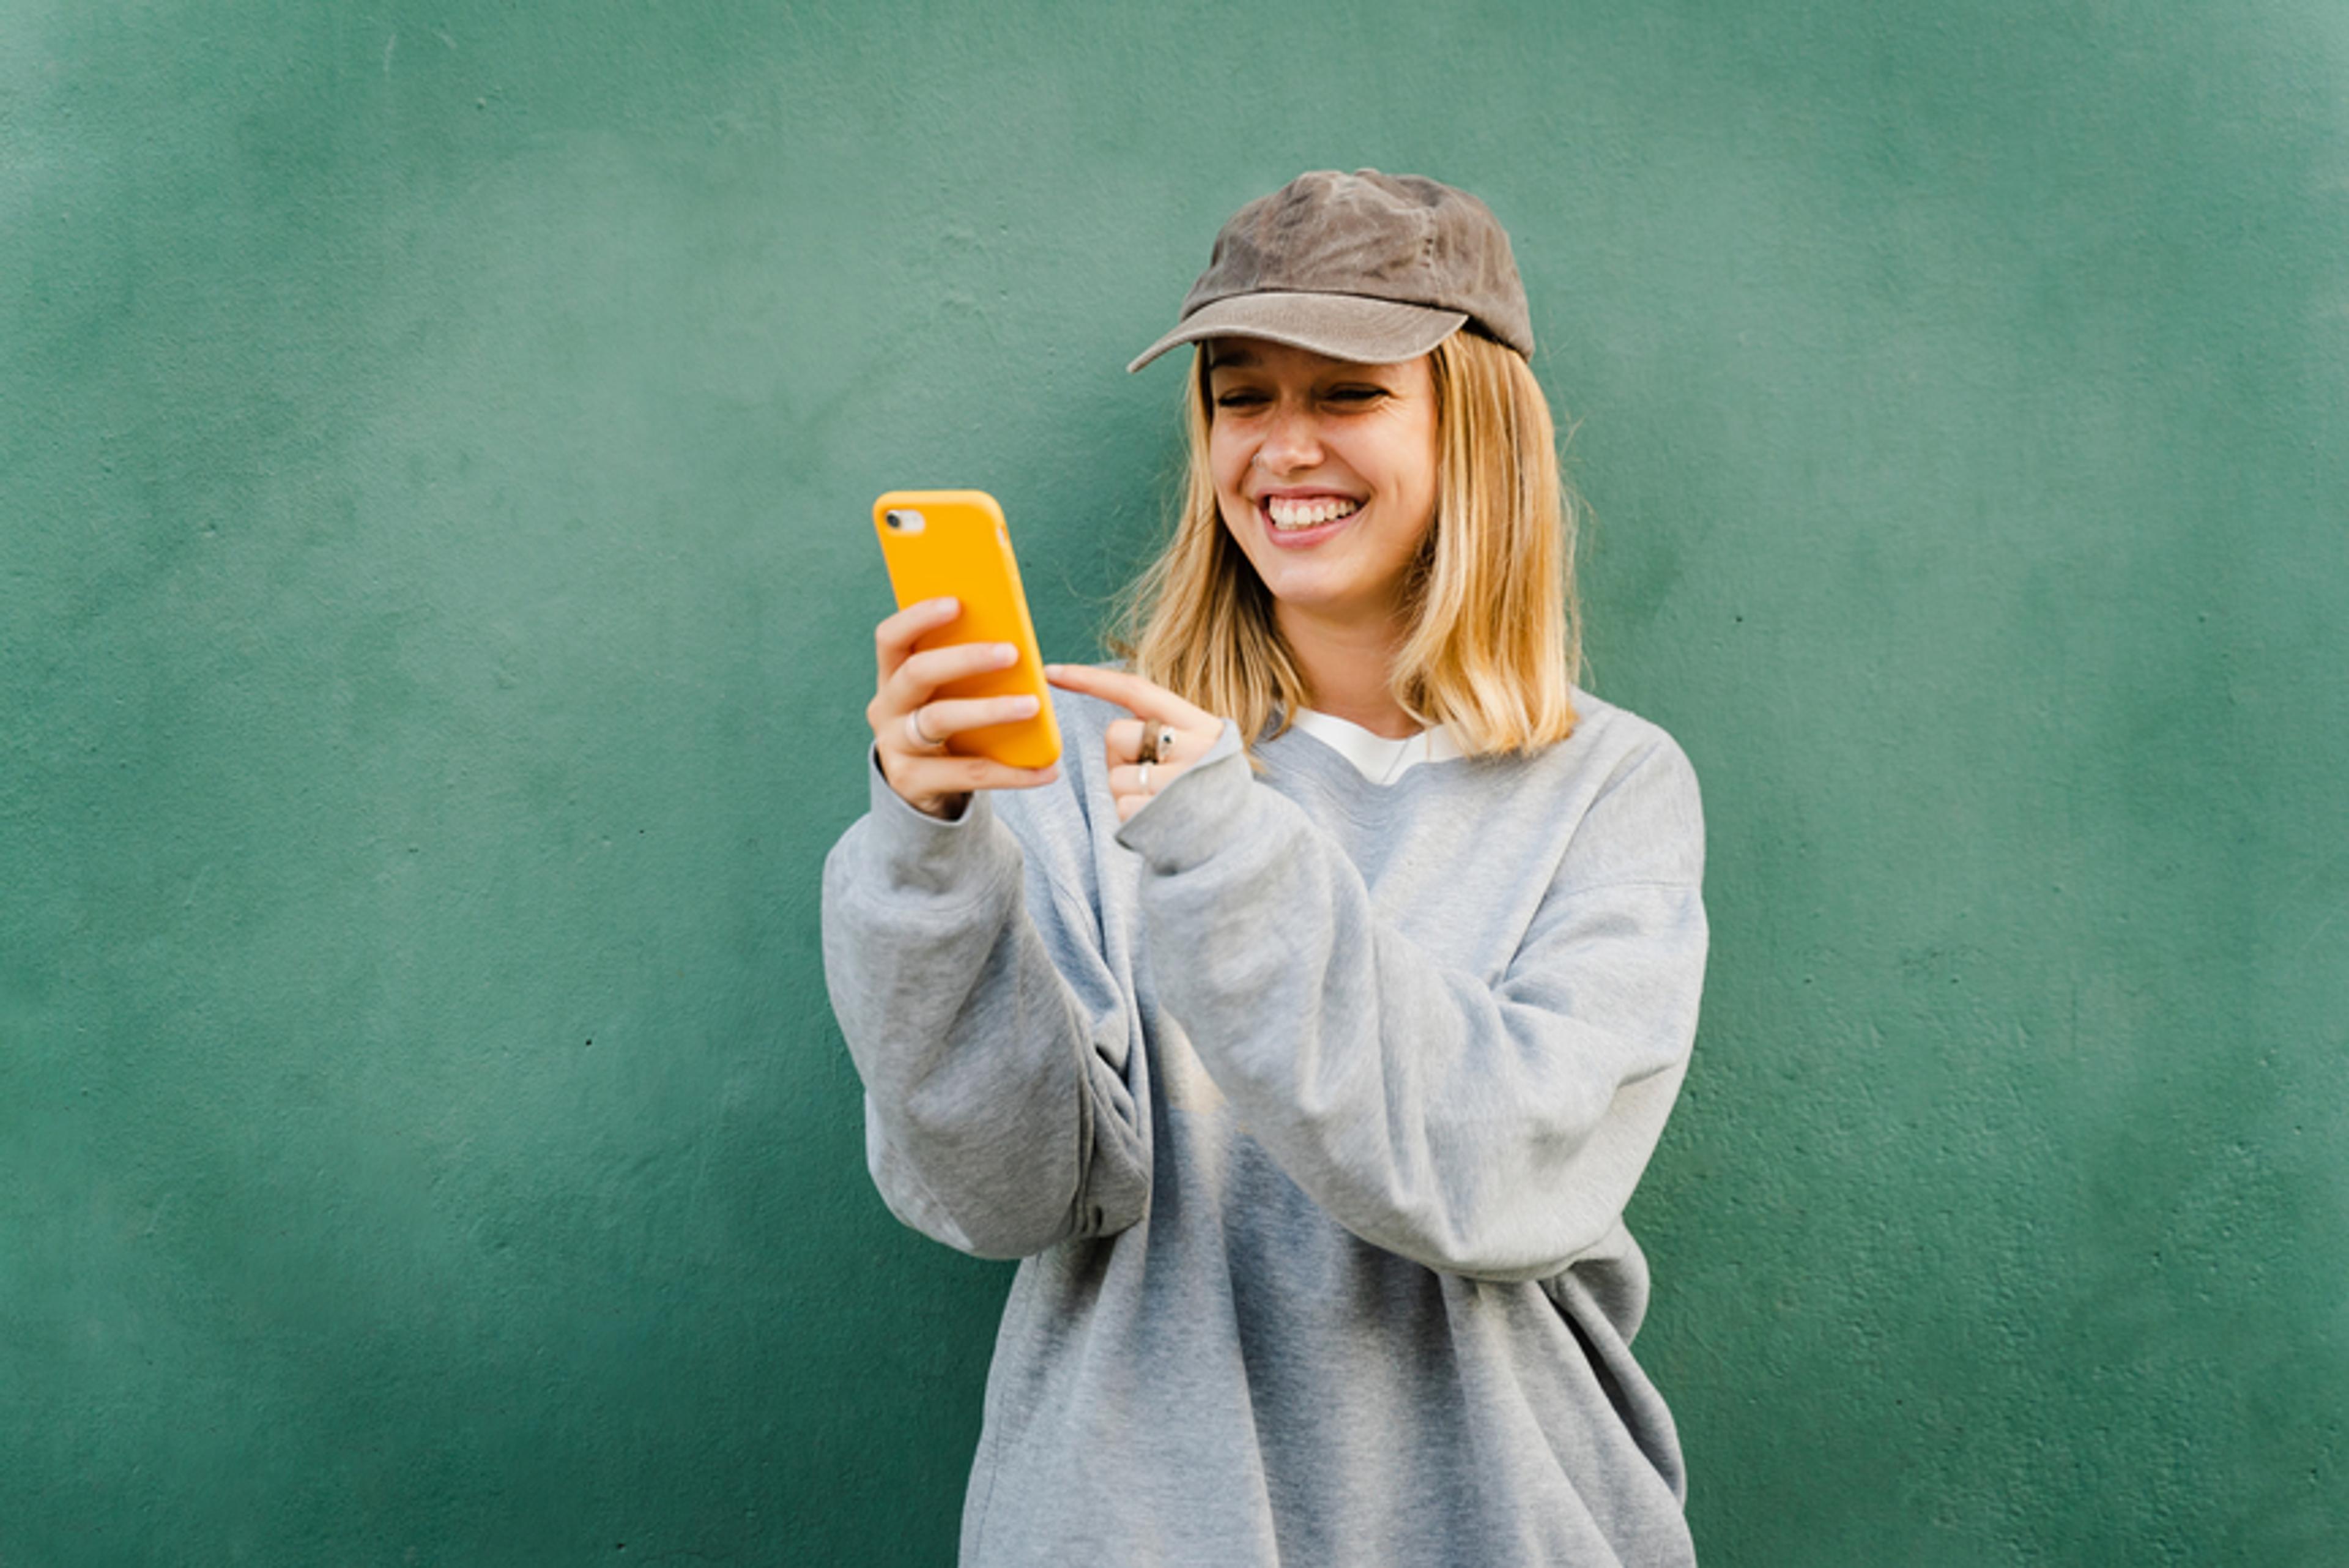 A photo of a woman smiling and looking at her phone